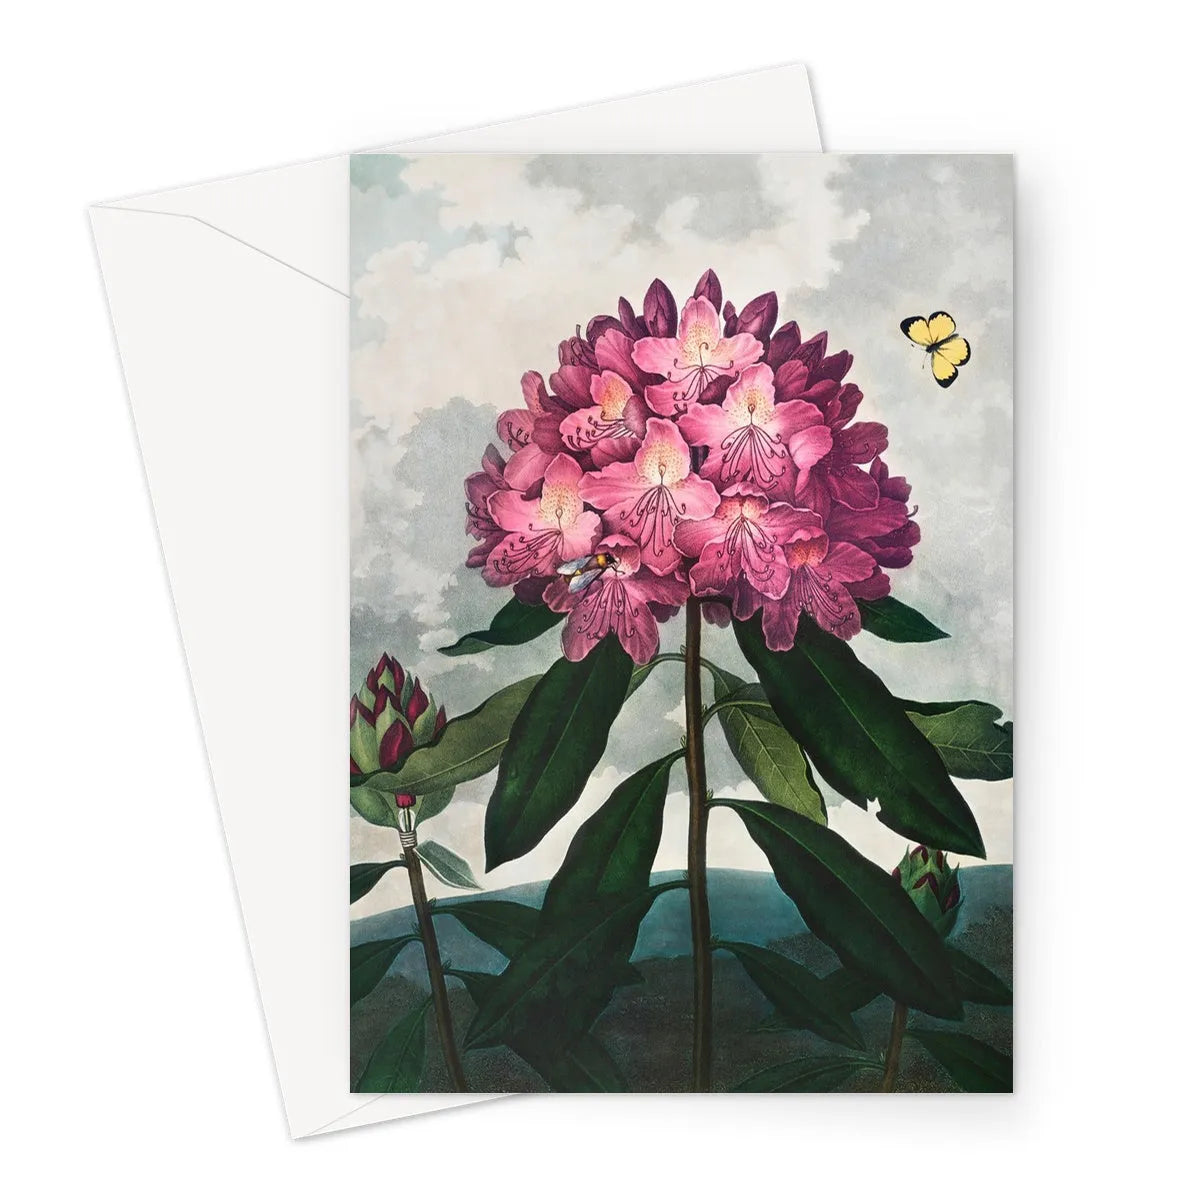 Pontic Rhododendron By Robert John Thornton Greeting Card - A5 Portrait / 1 Card - Greeting & Note Cards - Aesthetic Art